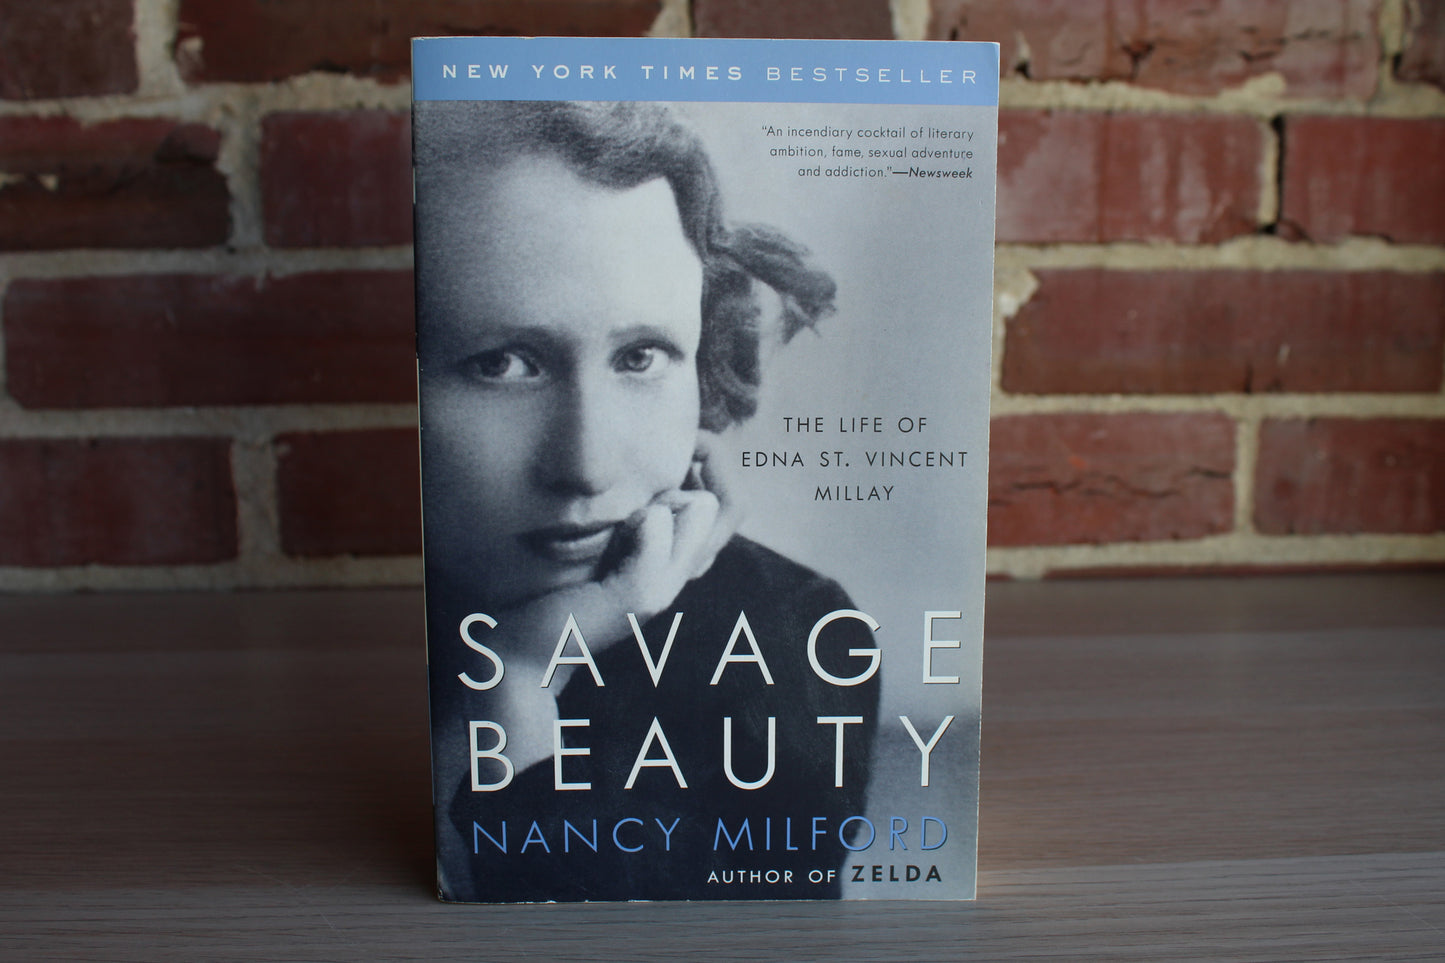 Savage Beauty:  The Life of Edna St. Vincent Millay by Nancy Milford